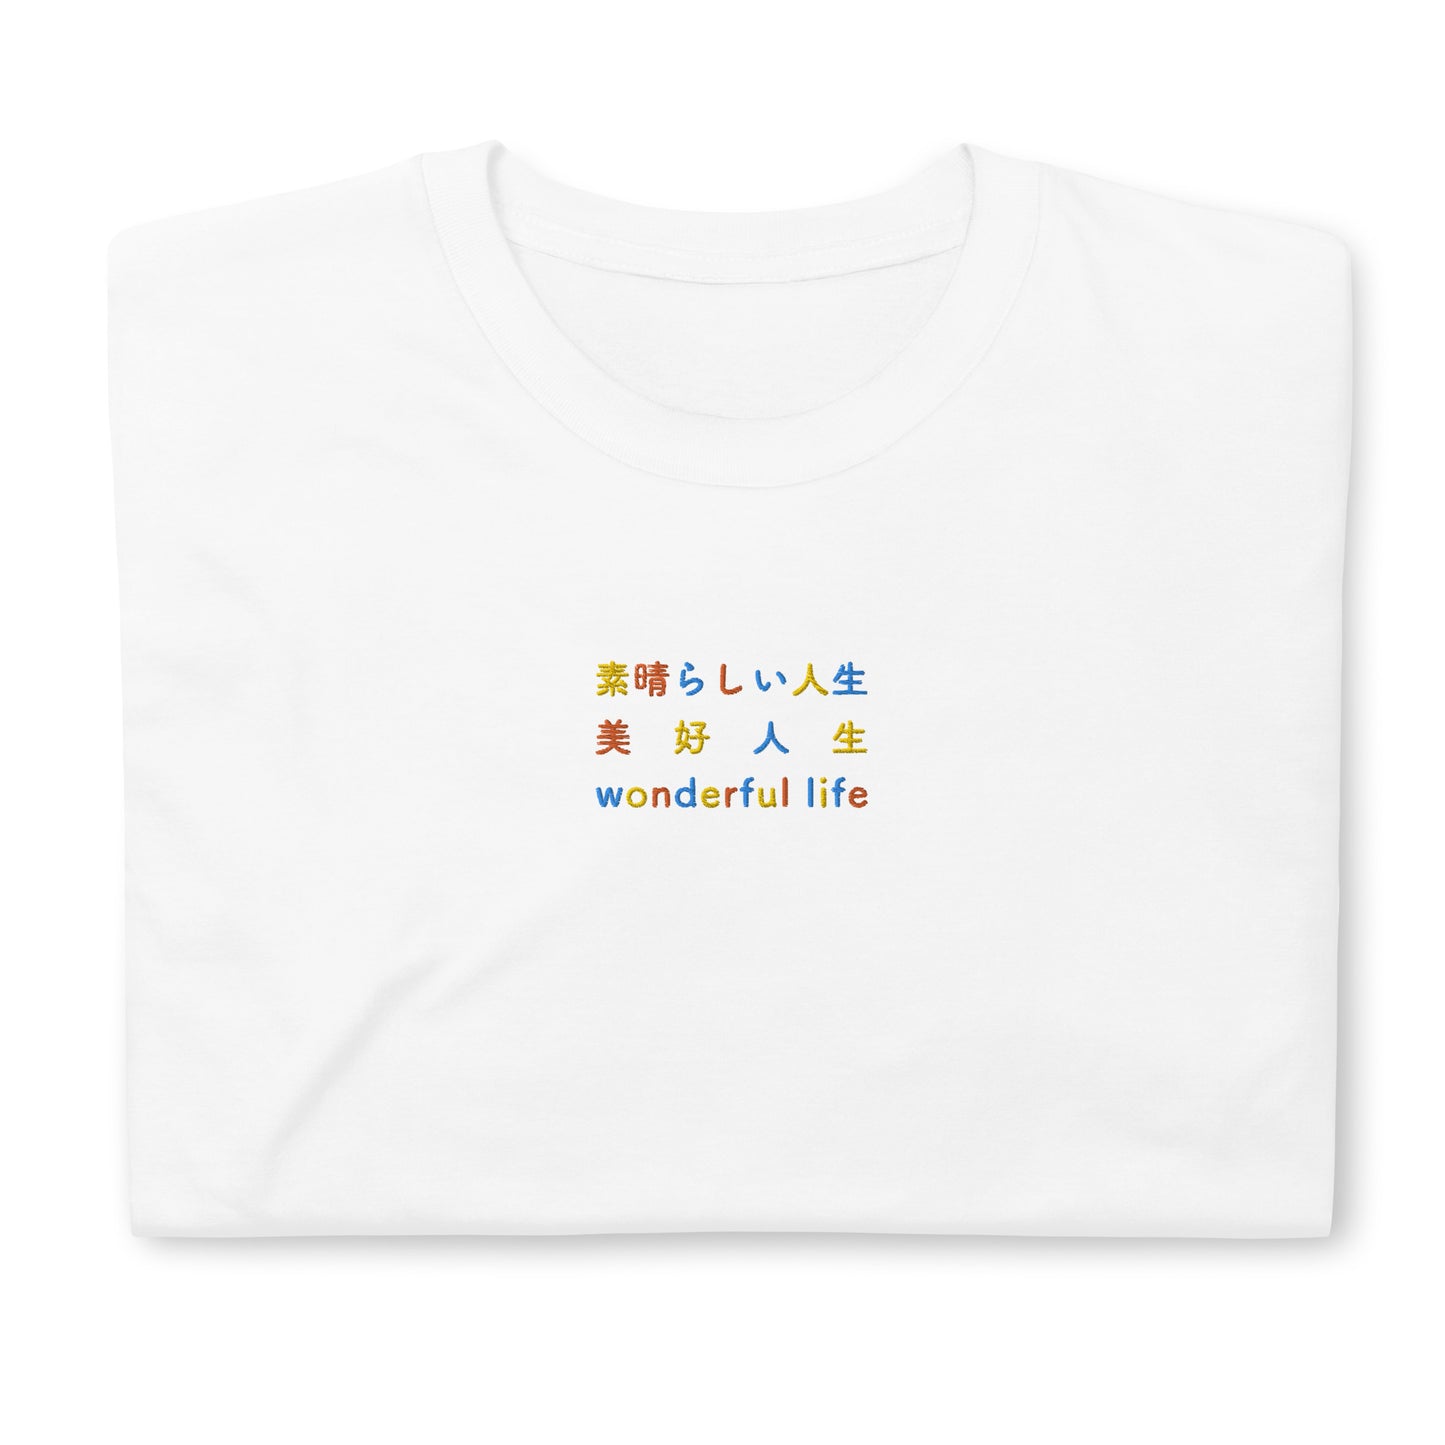 White High Quality Tee - Front Design with Yellow, Orange and Blue Embroidery "Wonderful Life" in Japanese,Chinese and English